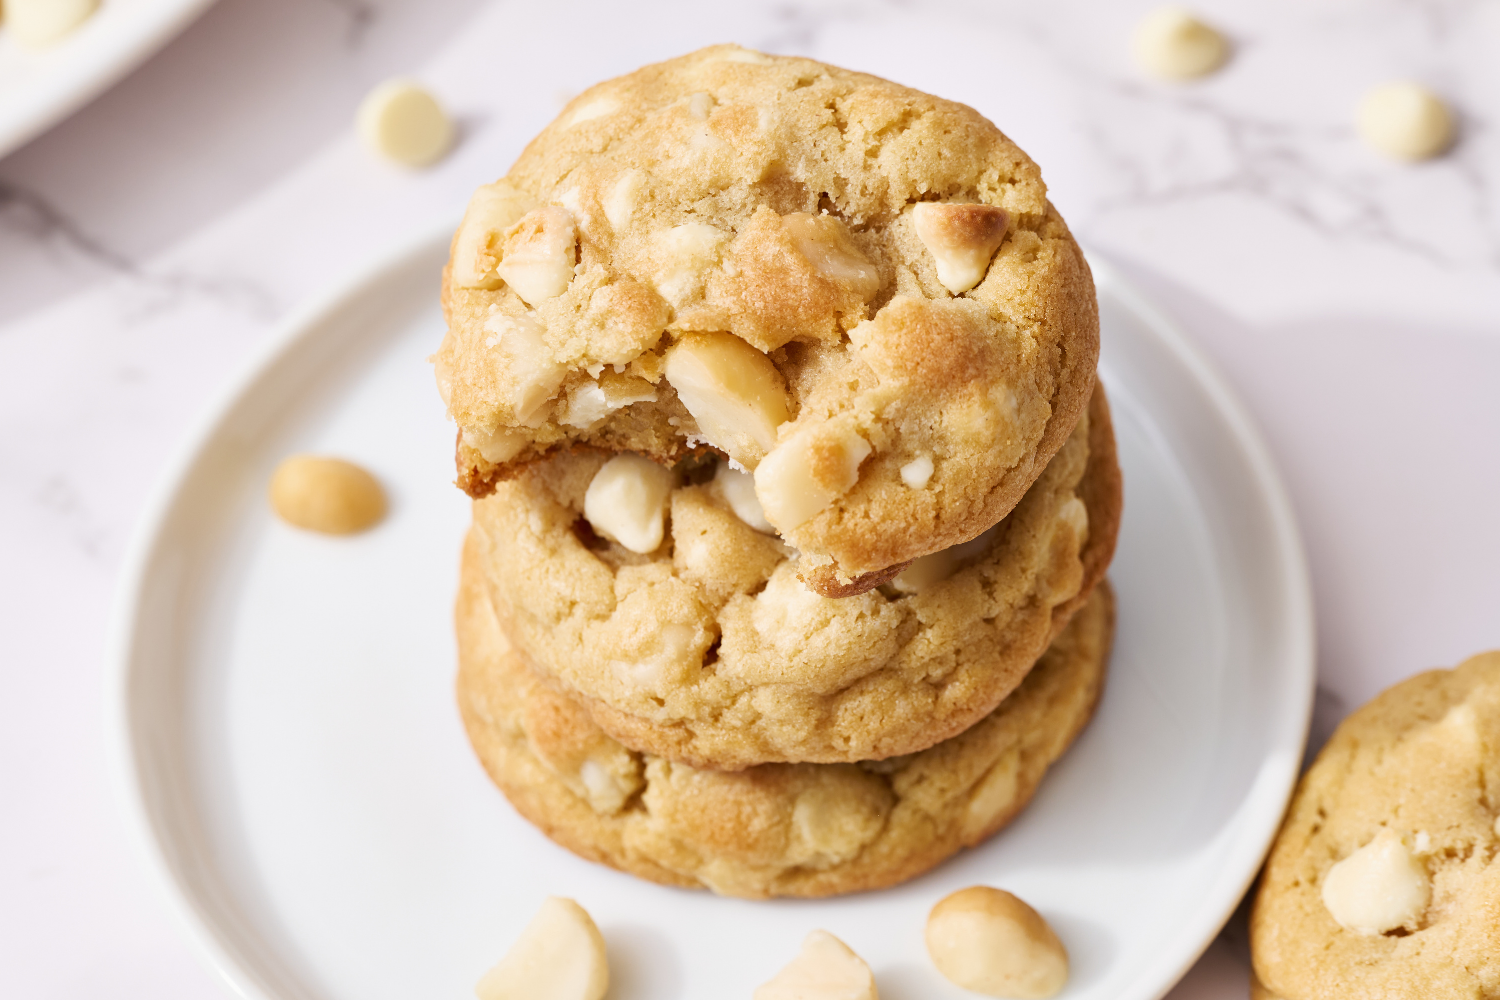 stack of White Chocolate Macadamia Nut Cookies, with the top cookie with a bite taken out.